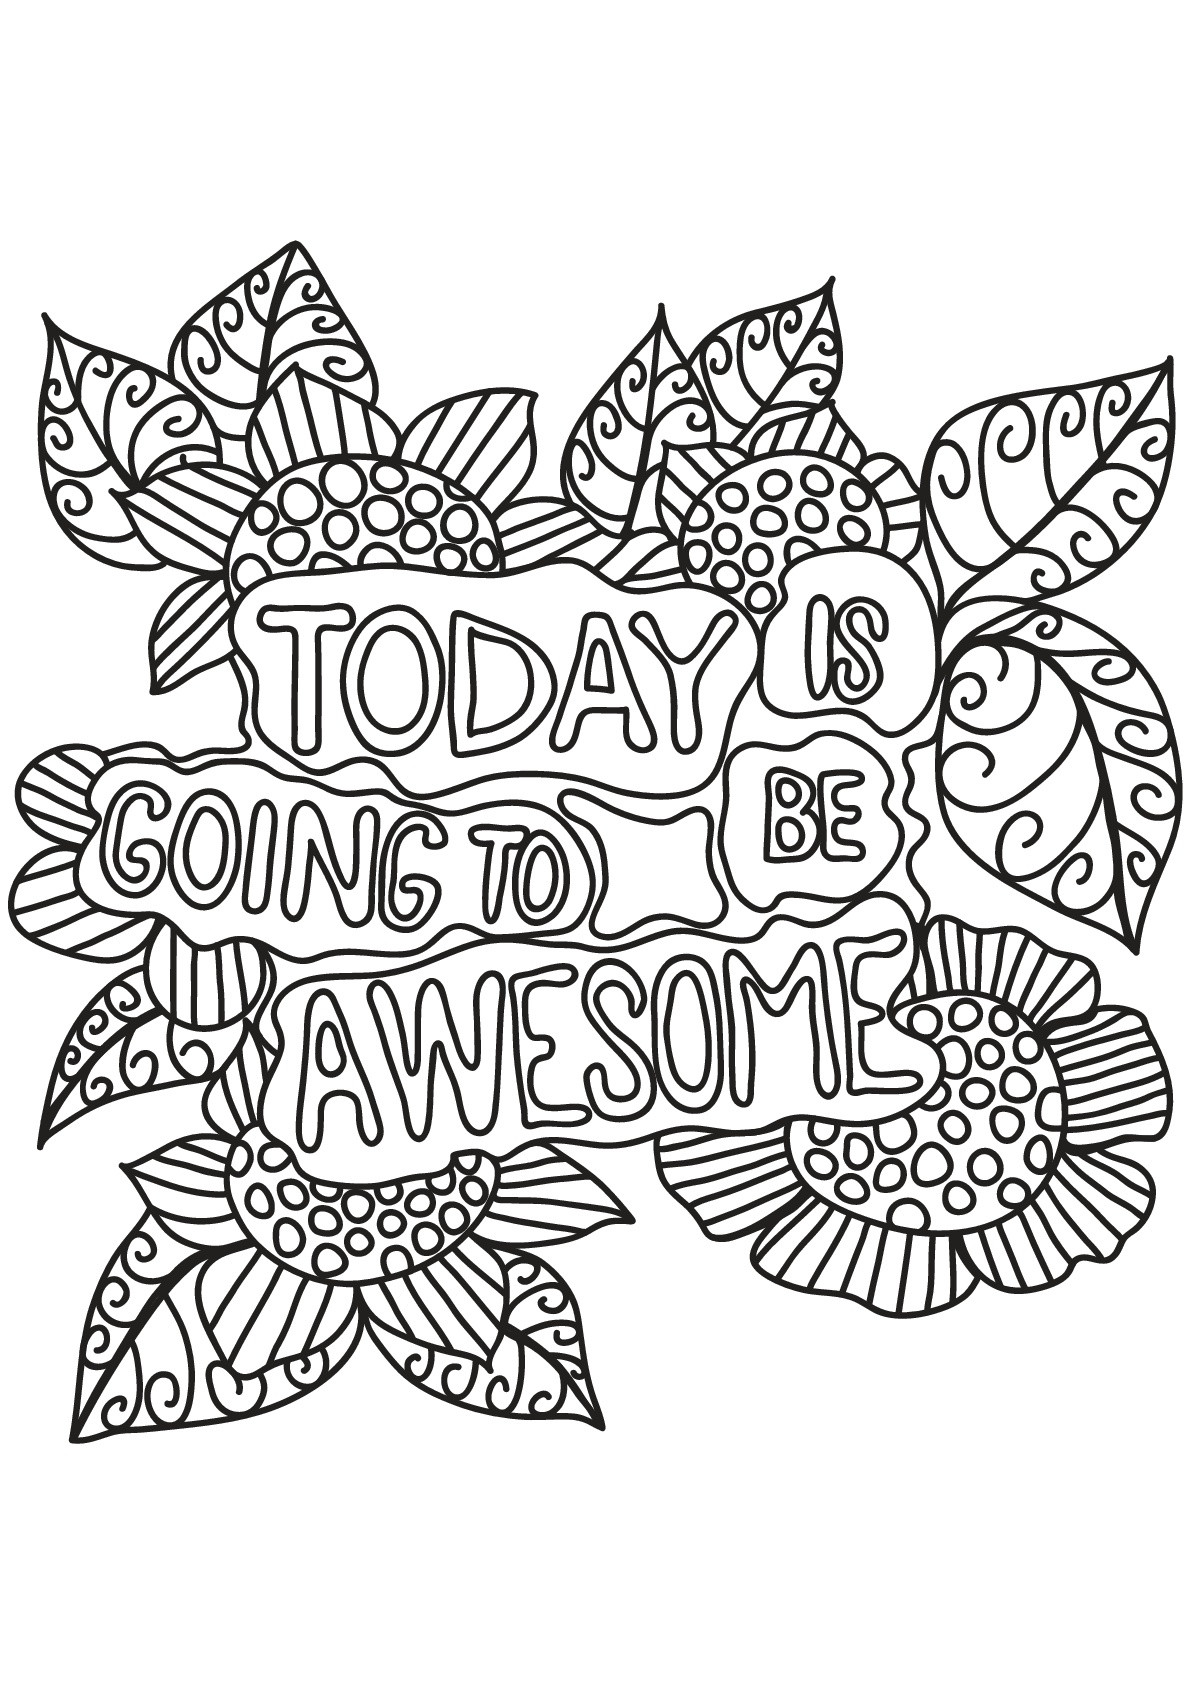 Quote Coloring Pages For Adults
 Free book quote 10 Quotes Adult Coloring Pages